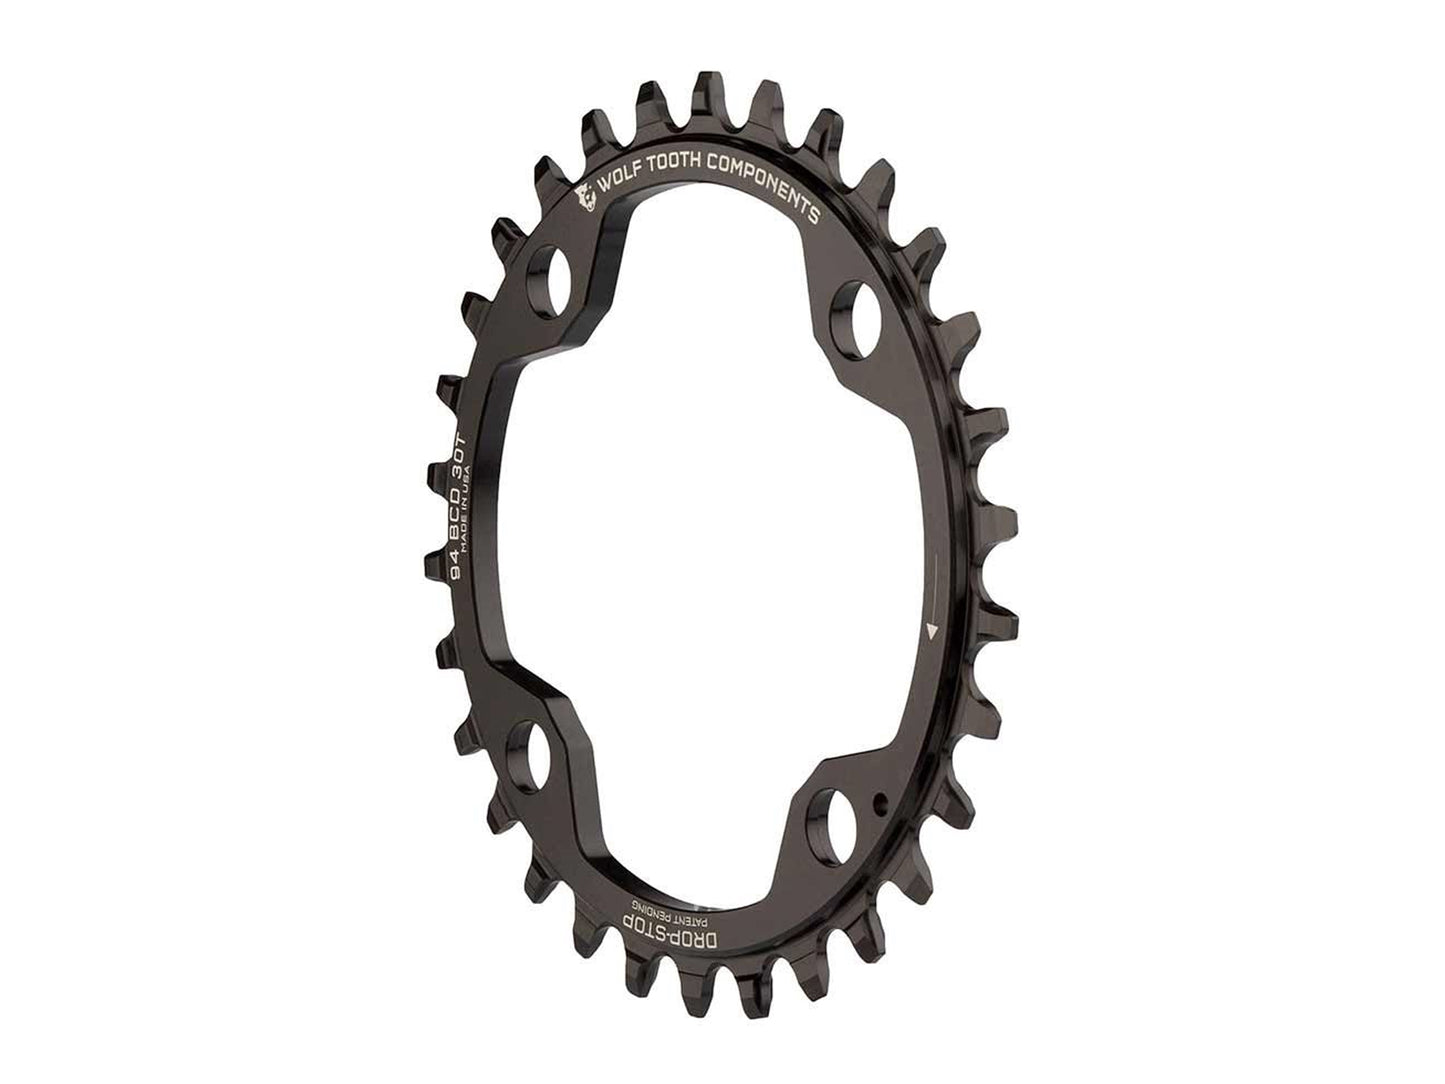 Wolf Tooth Components, BCD 104mm, Chainring, Teeth: 32, Speed: 9-12, BCD: 104, Bolts: 4, 7075 Aluminum, Black